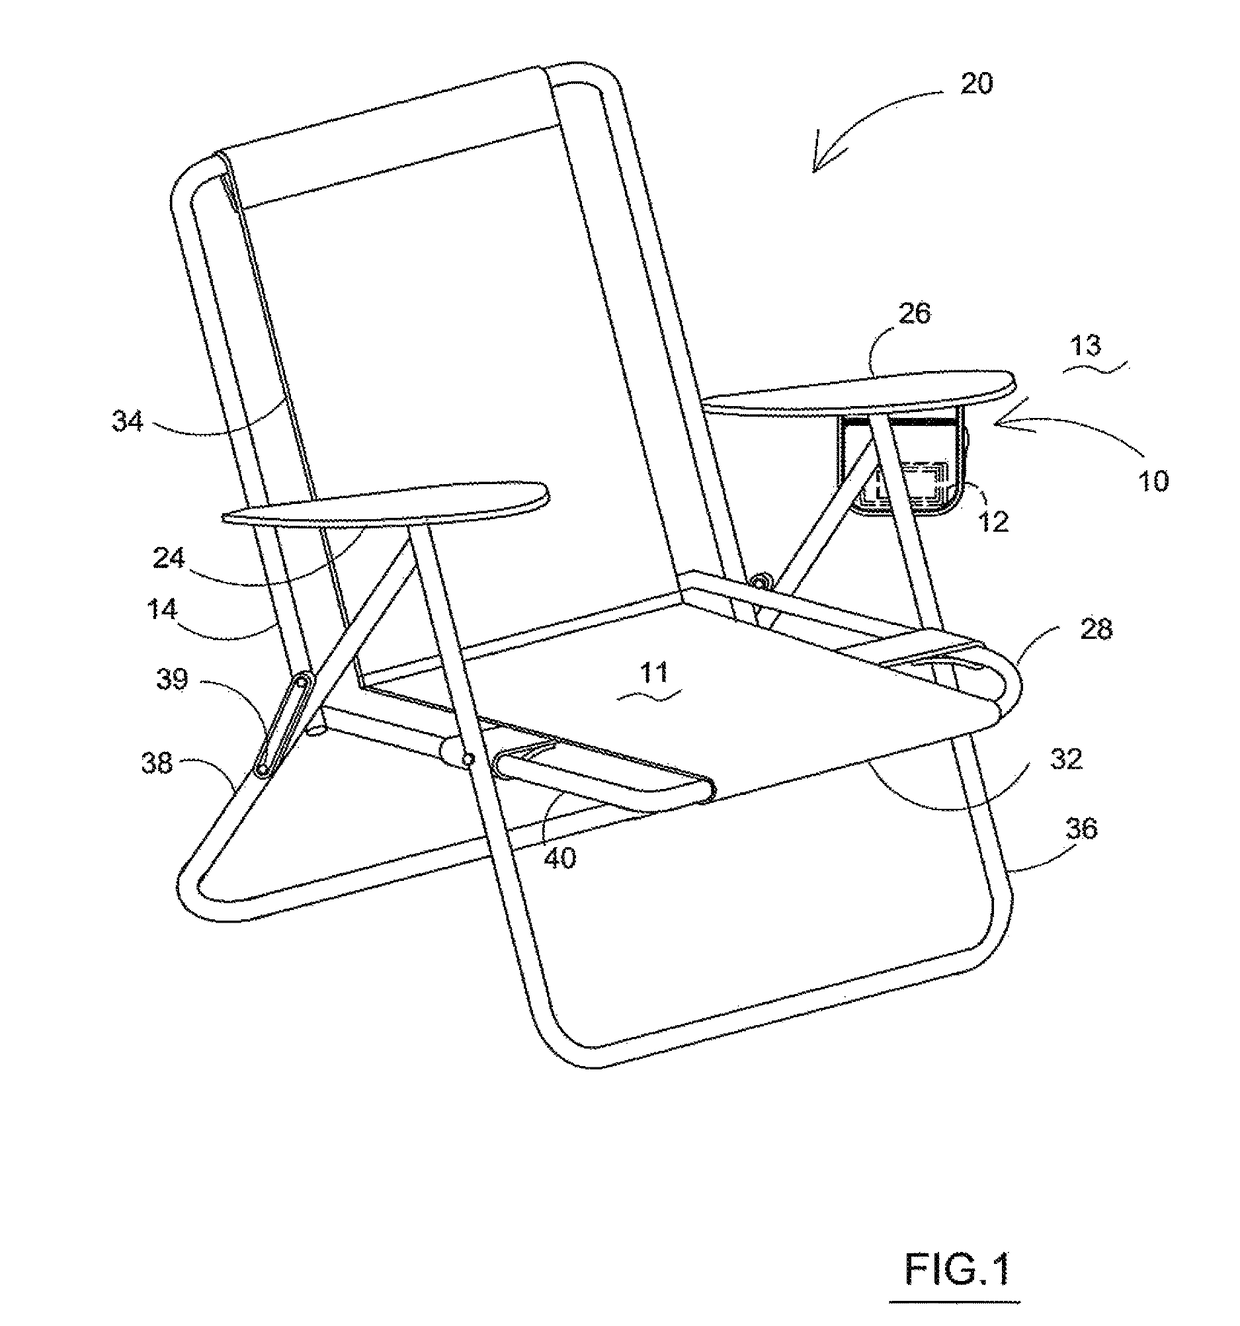 Chair with cell phone and accessory pouch